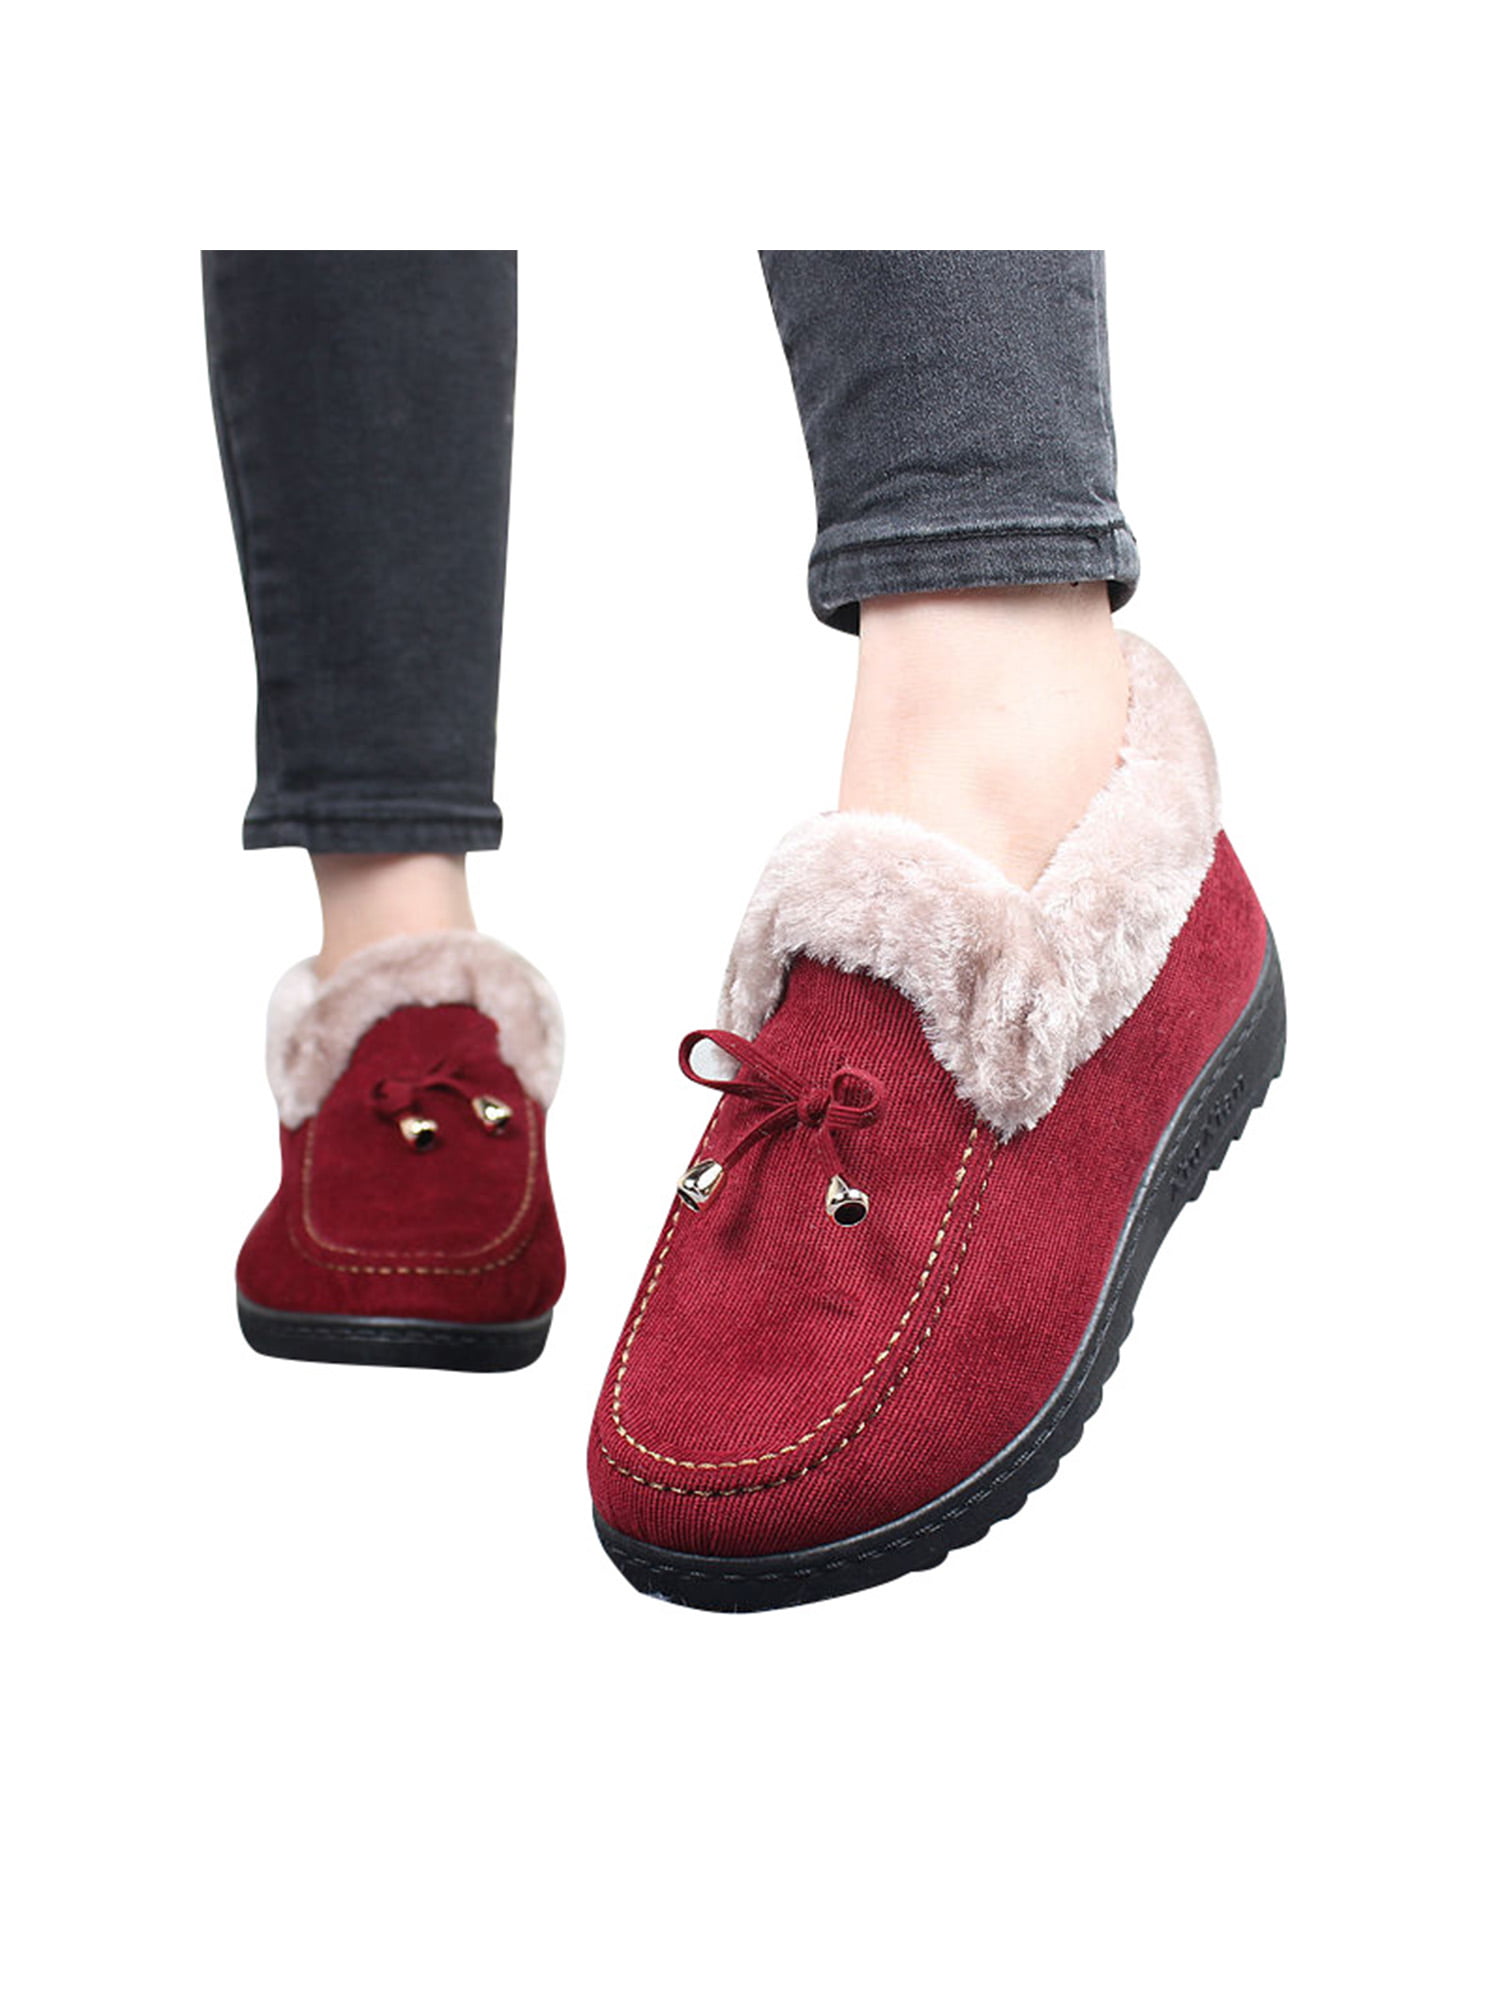 LADIES WEDGE SLIPPERS WOMEN DUNLOP MEMORY FOAM THERMAL WARM WASHABLE SHOES BOOTS 